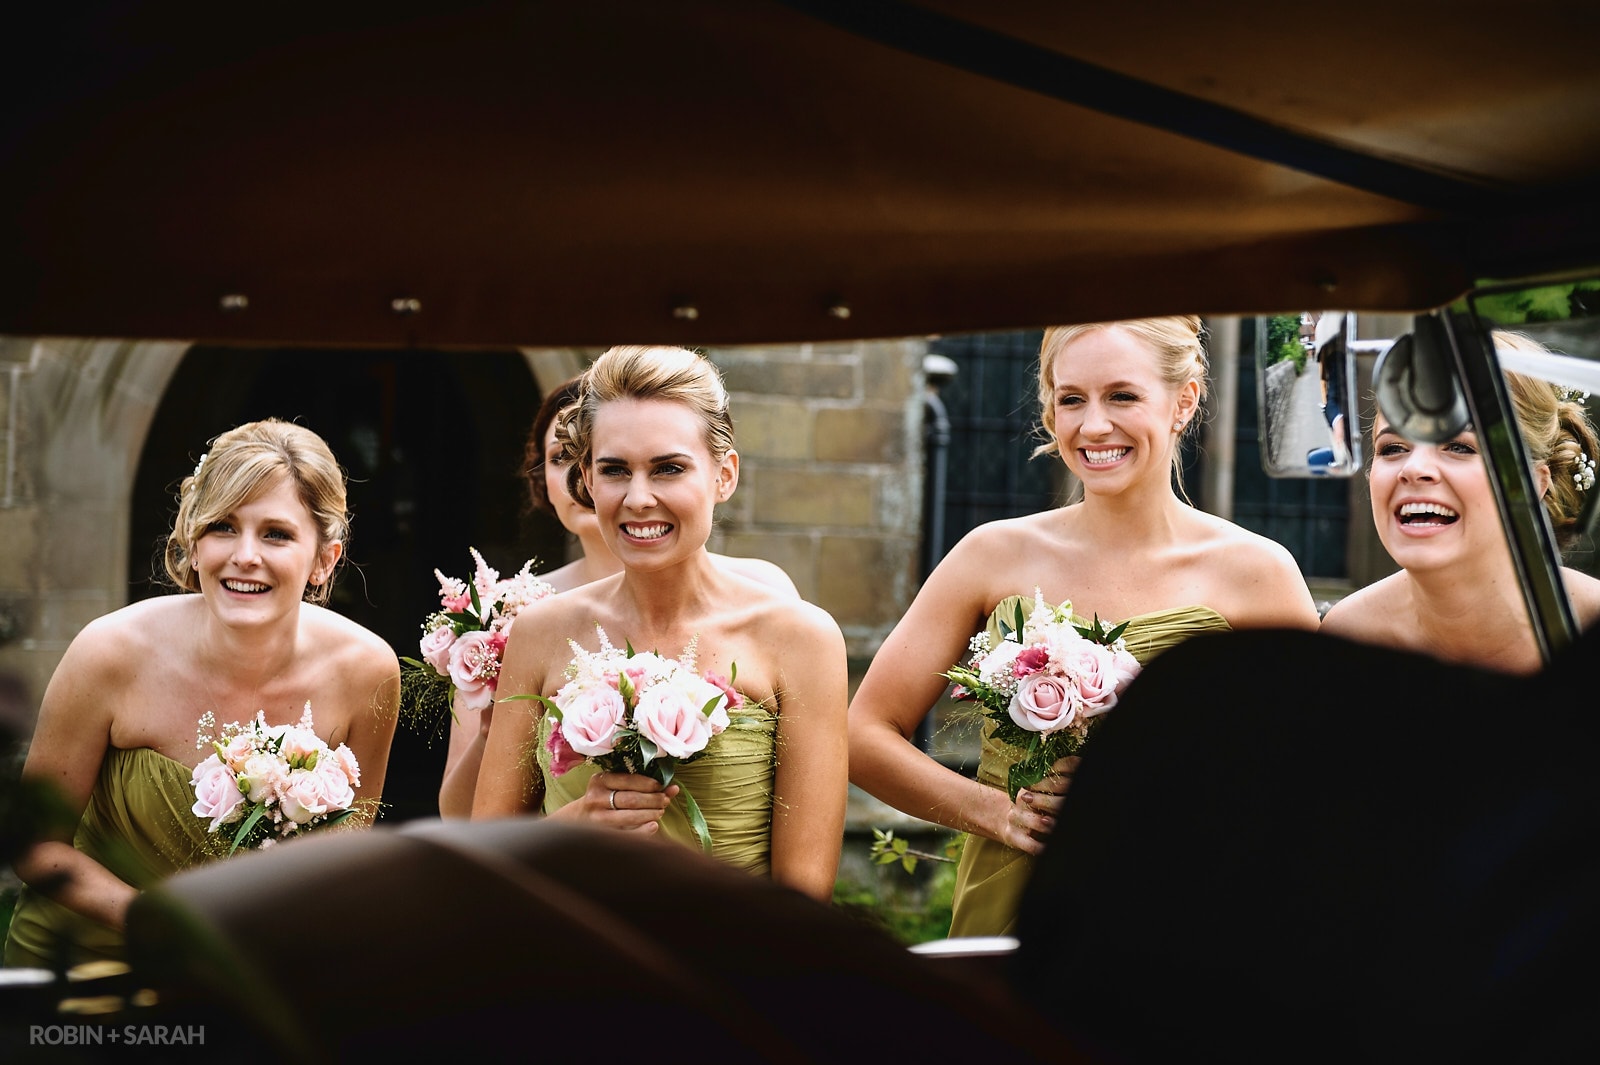 Bridesmaids react to seeing bride arrive at wedding in car